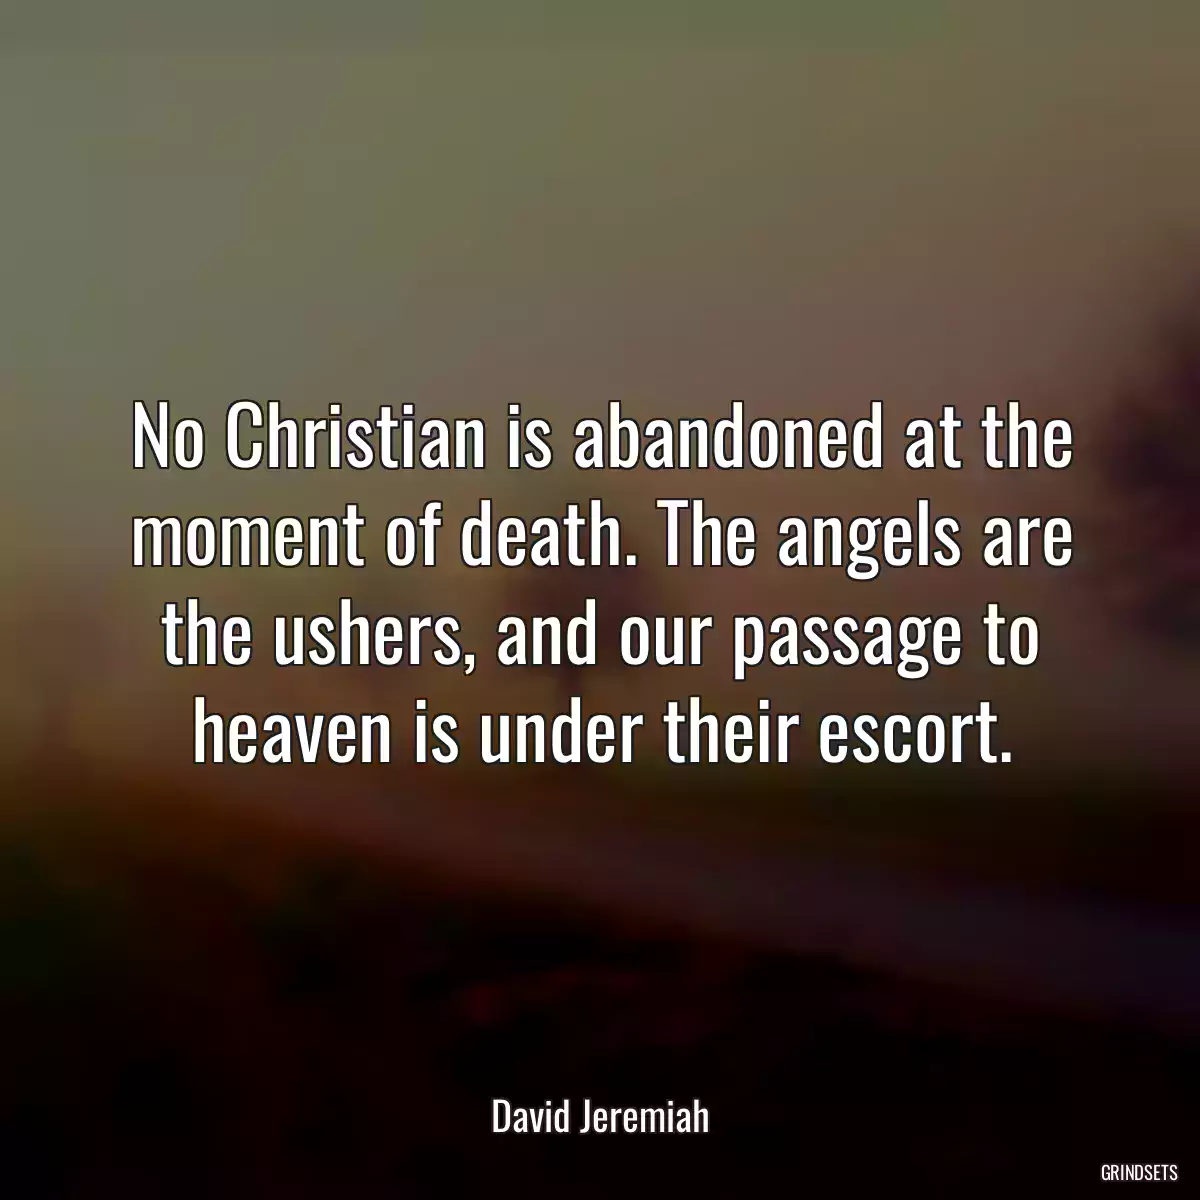 No Christian is abandoned at the moment of death. The angels are the ushers, and our passage to heaven is under their escort.